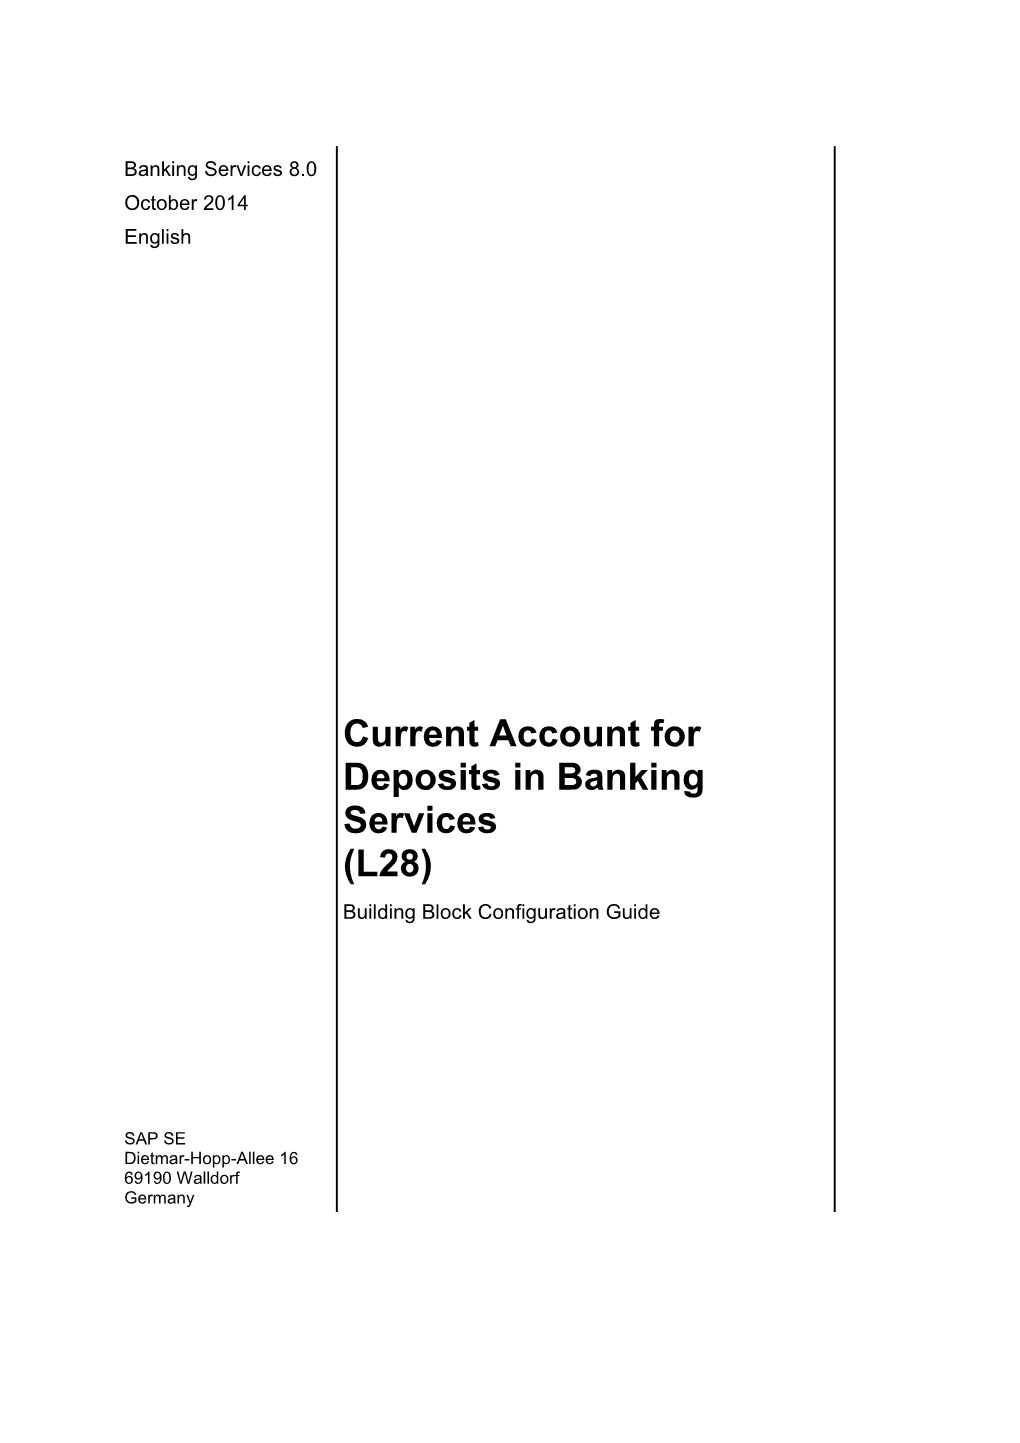 SAP Best Practices Current Account for Deposits in Banking Services (L28): Configuration Guide